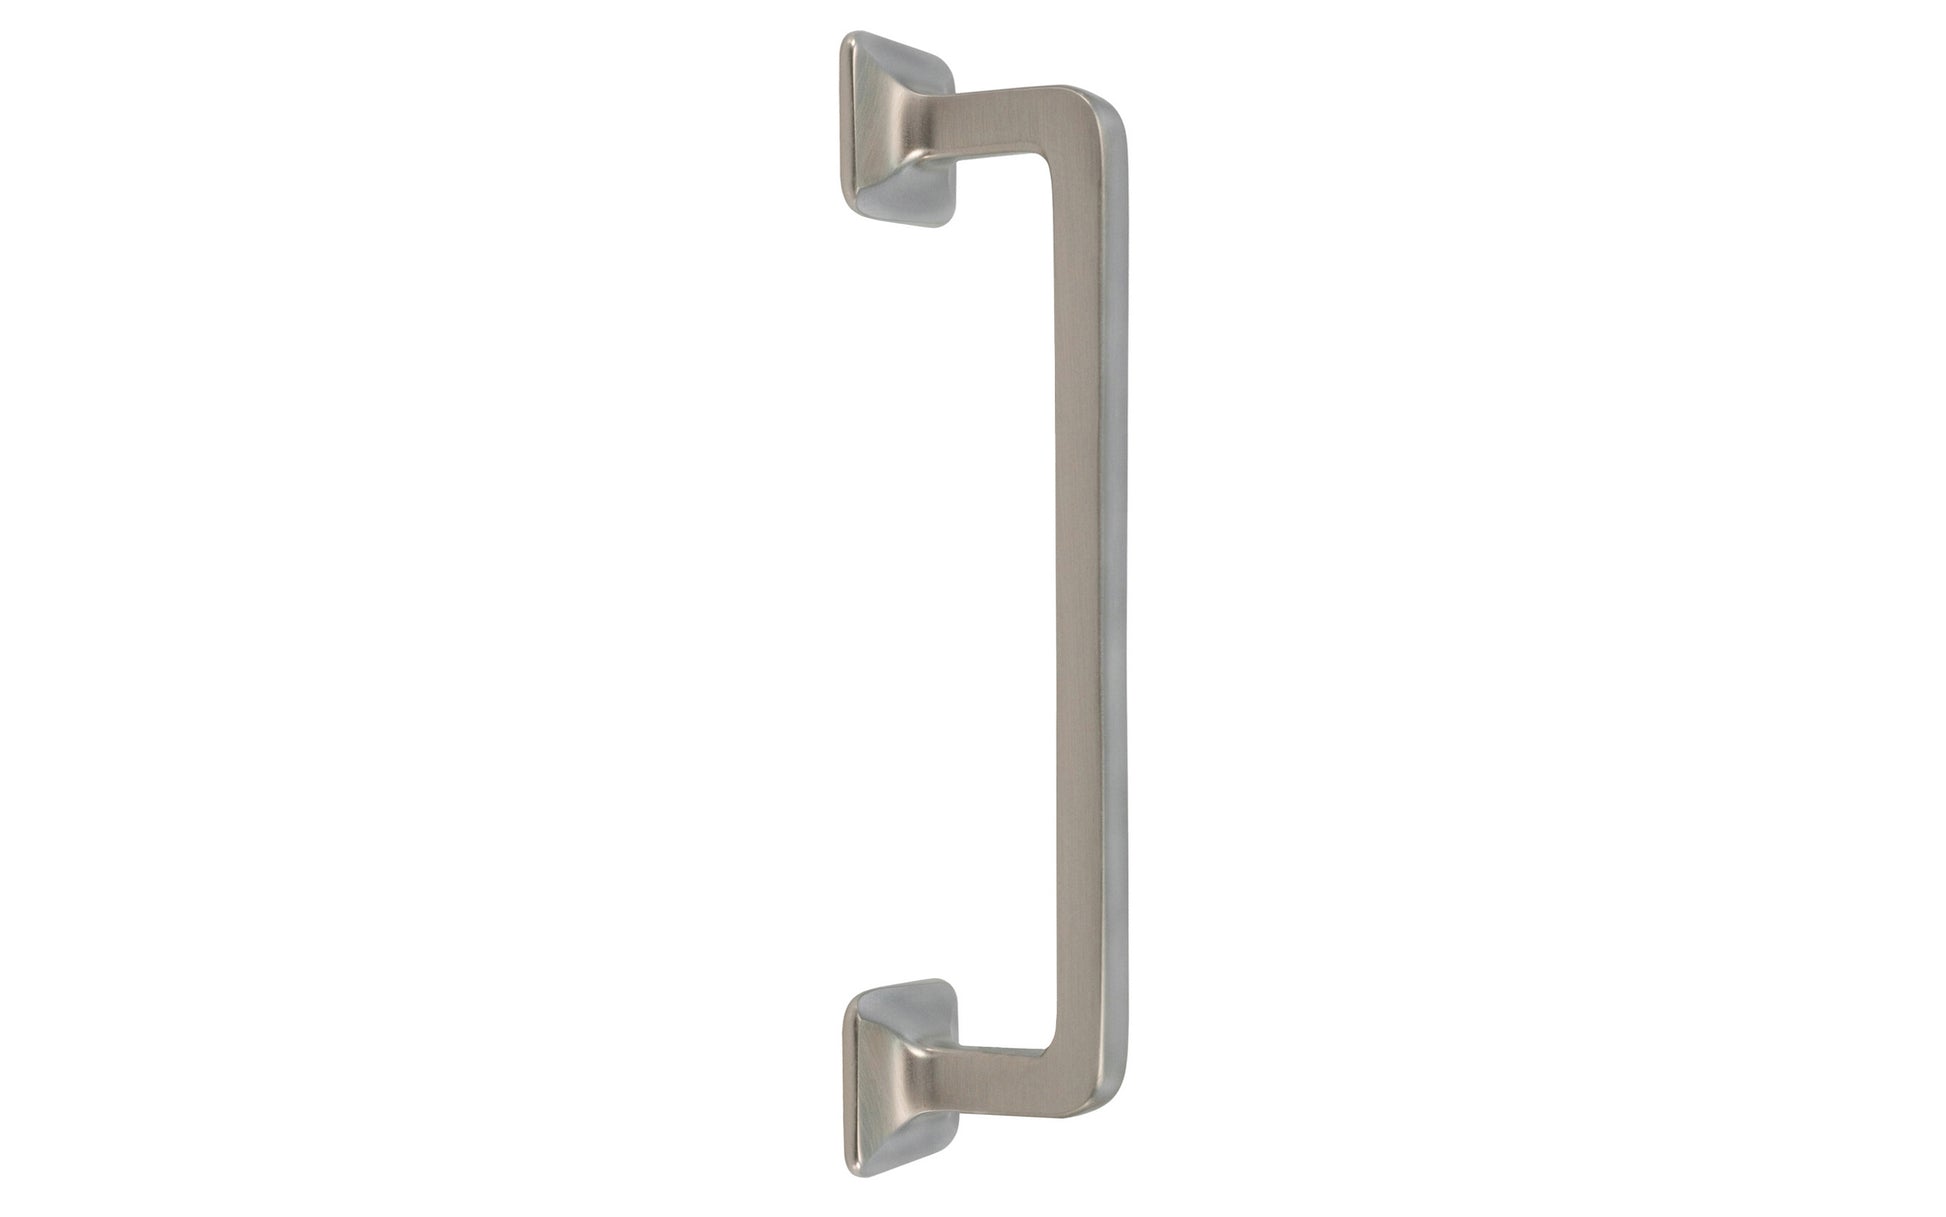 Vintage-style Hardware · Classic Solid Brass Handle Pull ~ 4" On Centers. Mission-Style / Arts & Crafts style. Brushed nickel finish. 4" center to center pull. solid brass kitchen cabinet pull. Drawer pull handle. Authentic reproduction hardware.